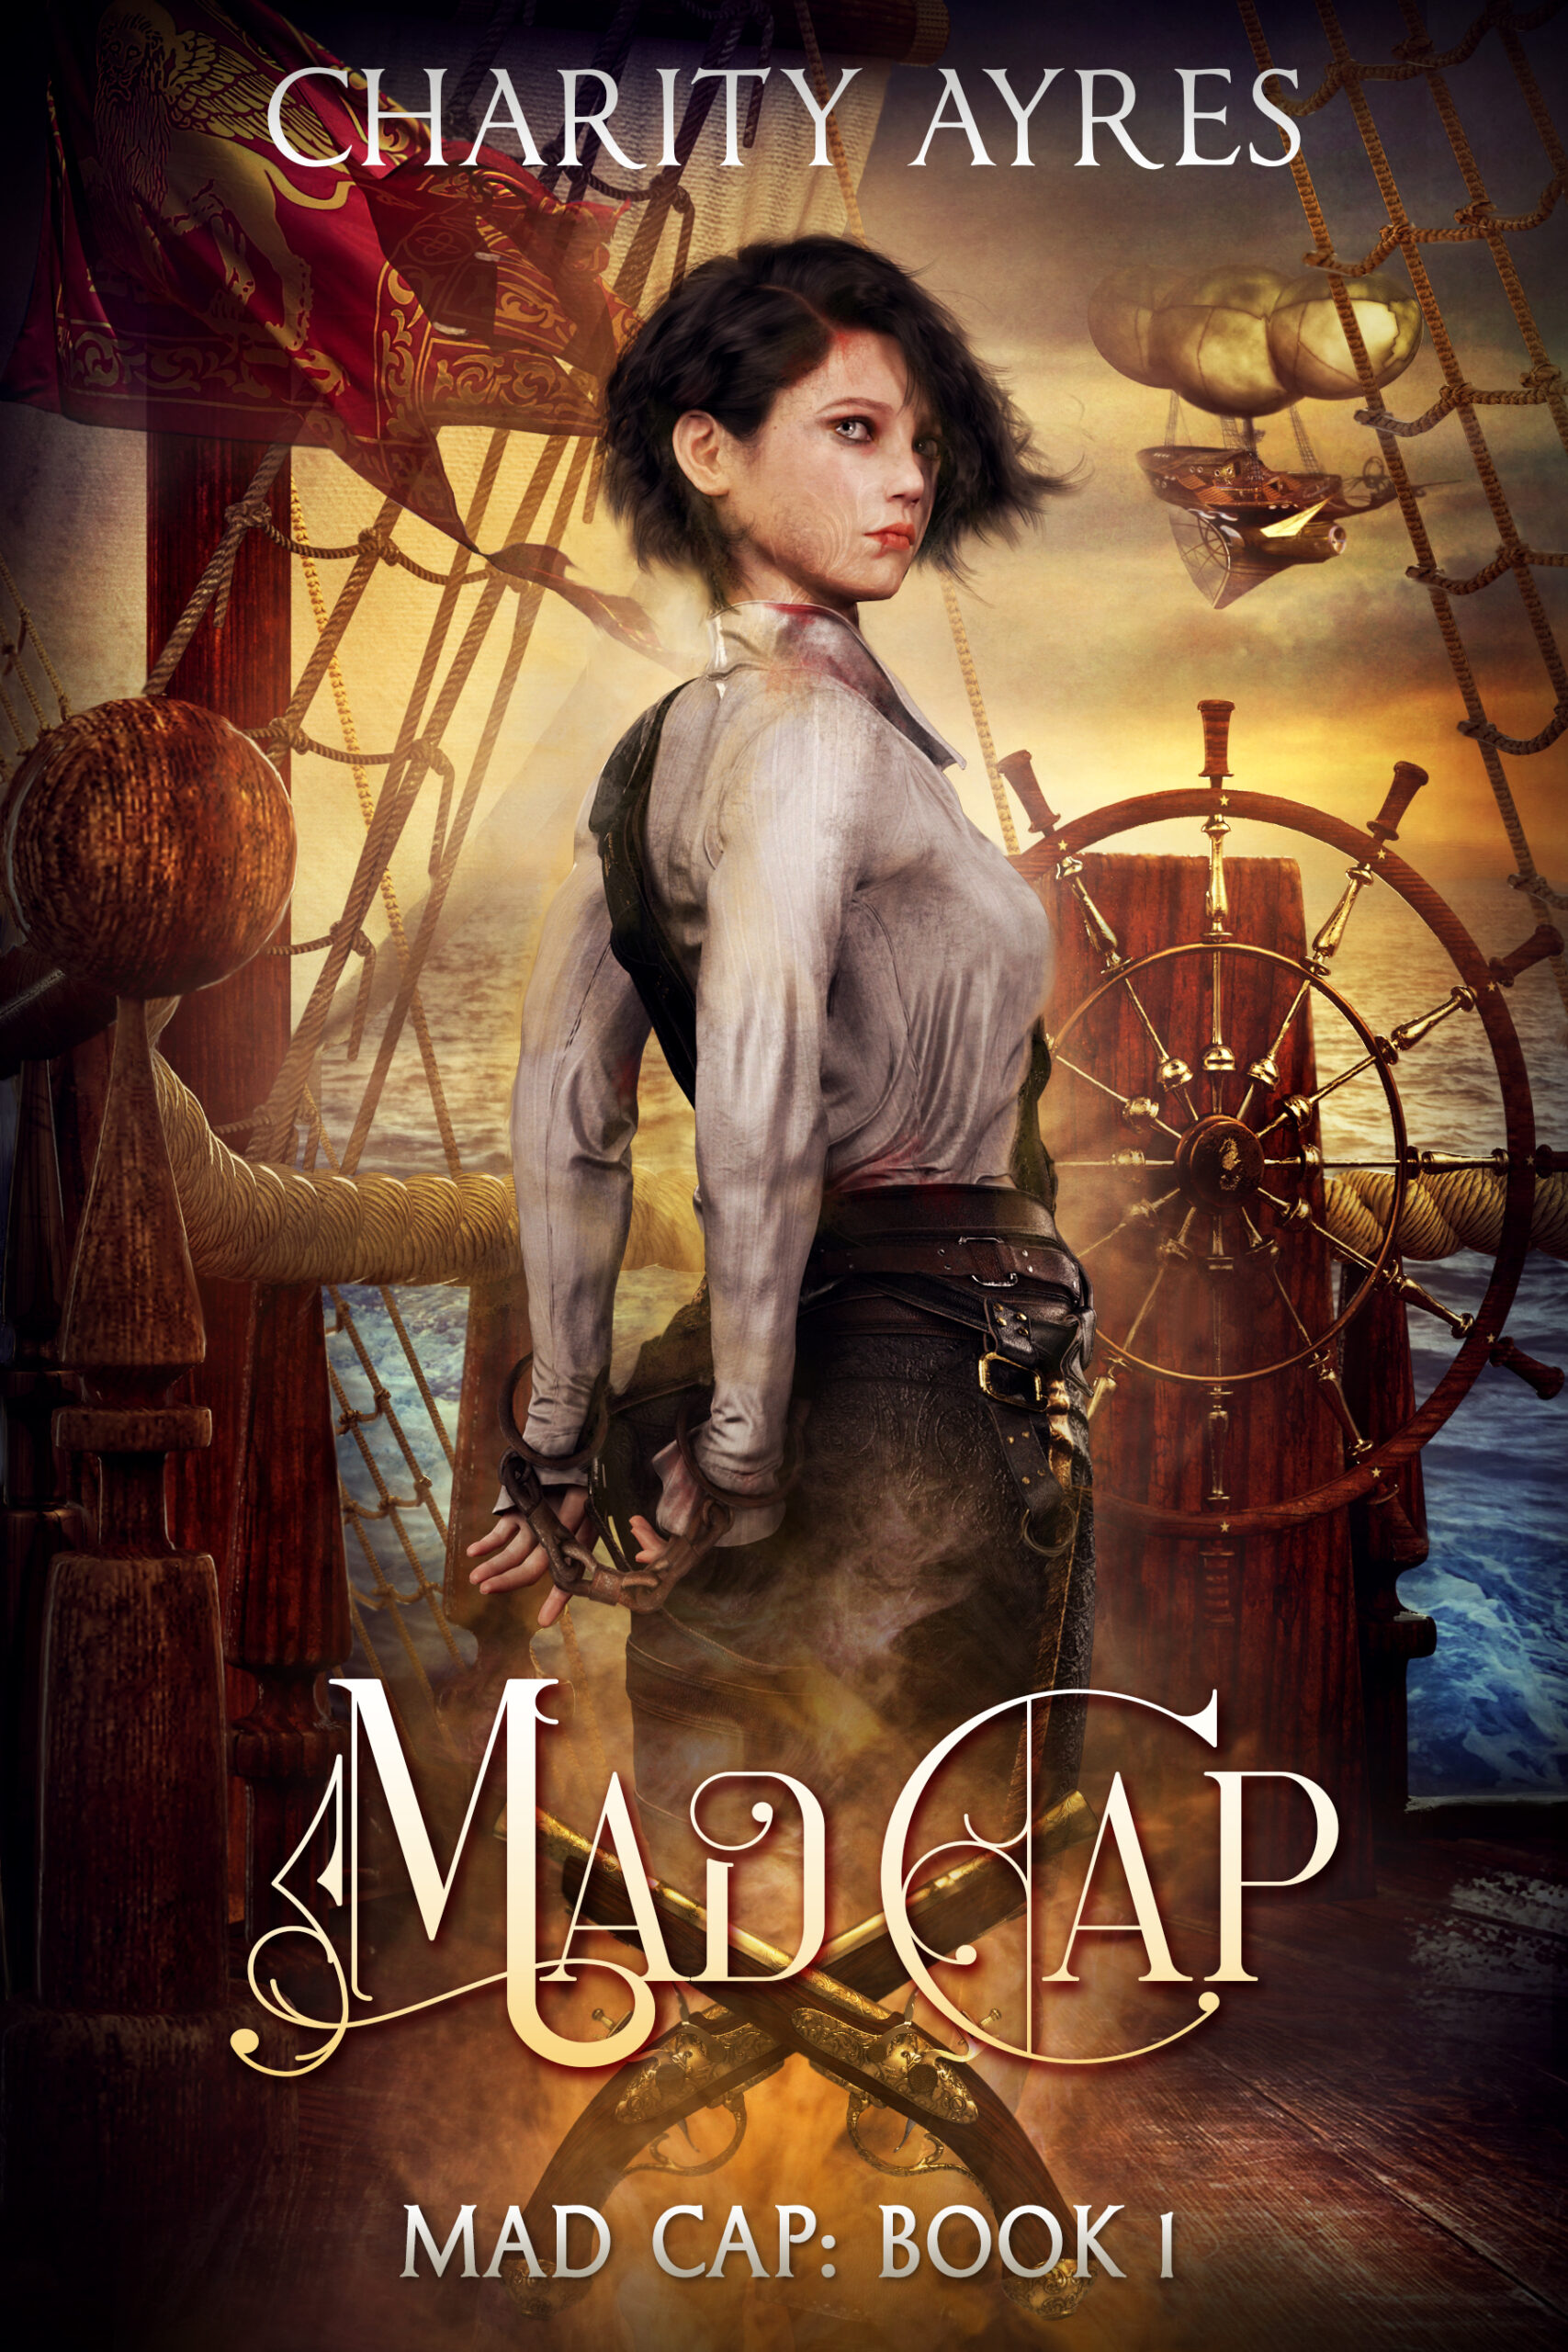 Itching for a new Adventure?  MadCap by Charity Ayres Now available for pre-order!